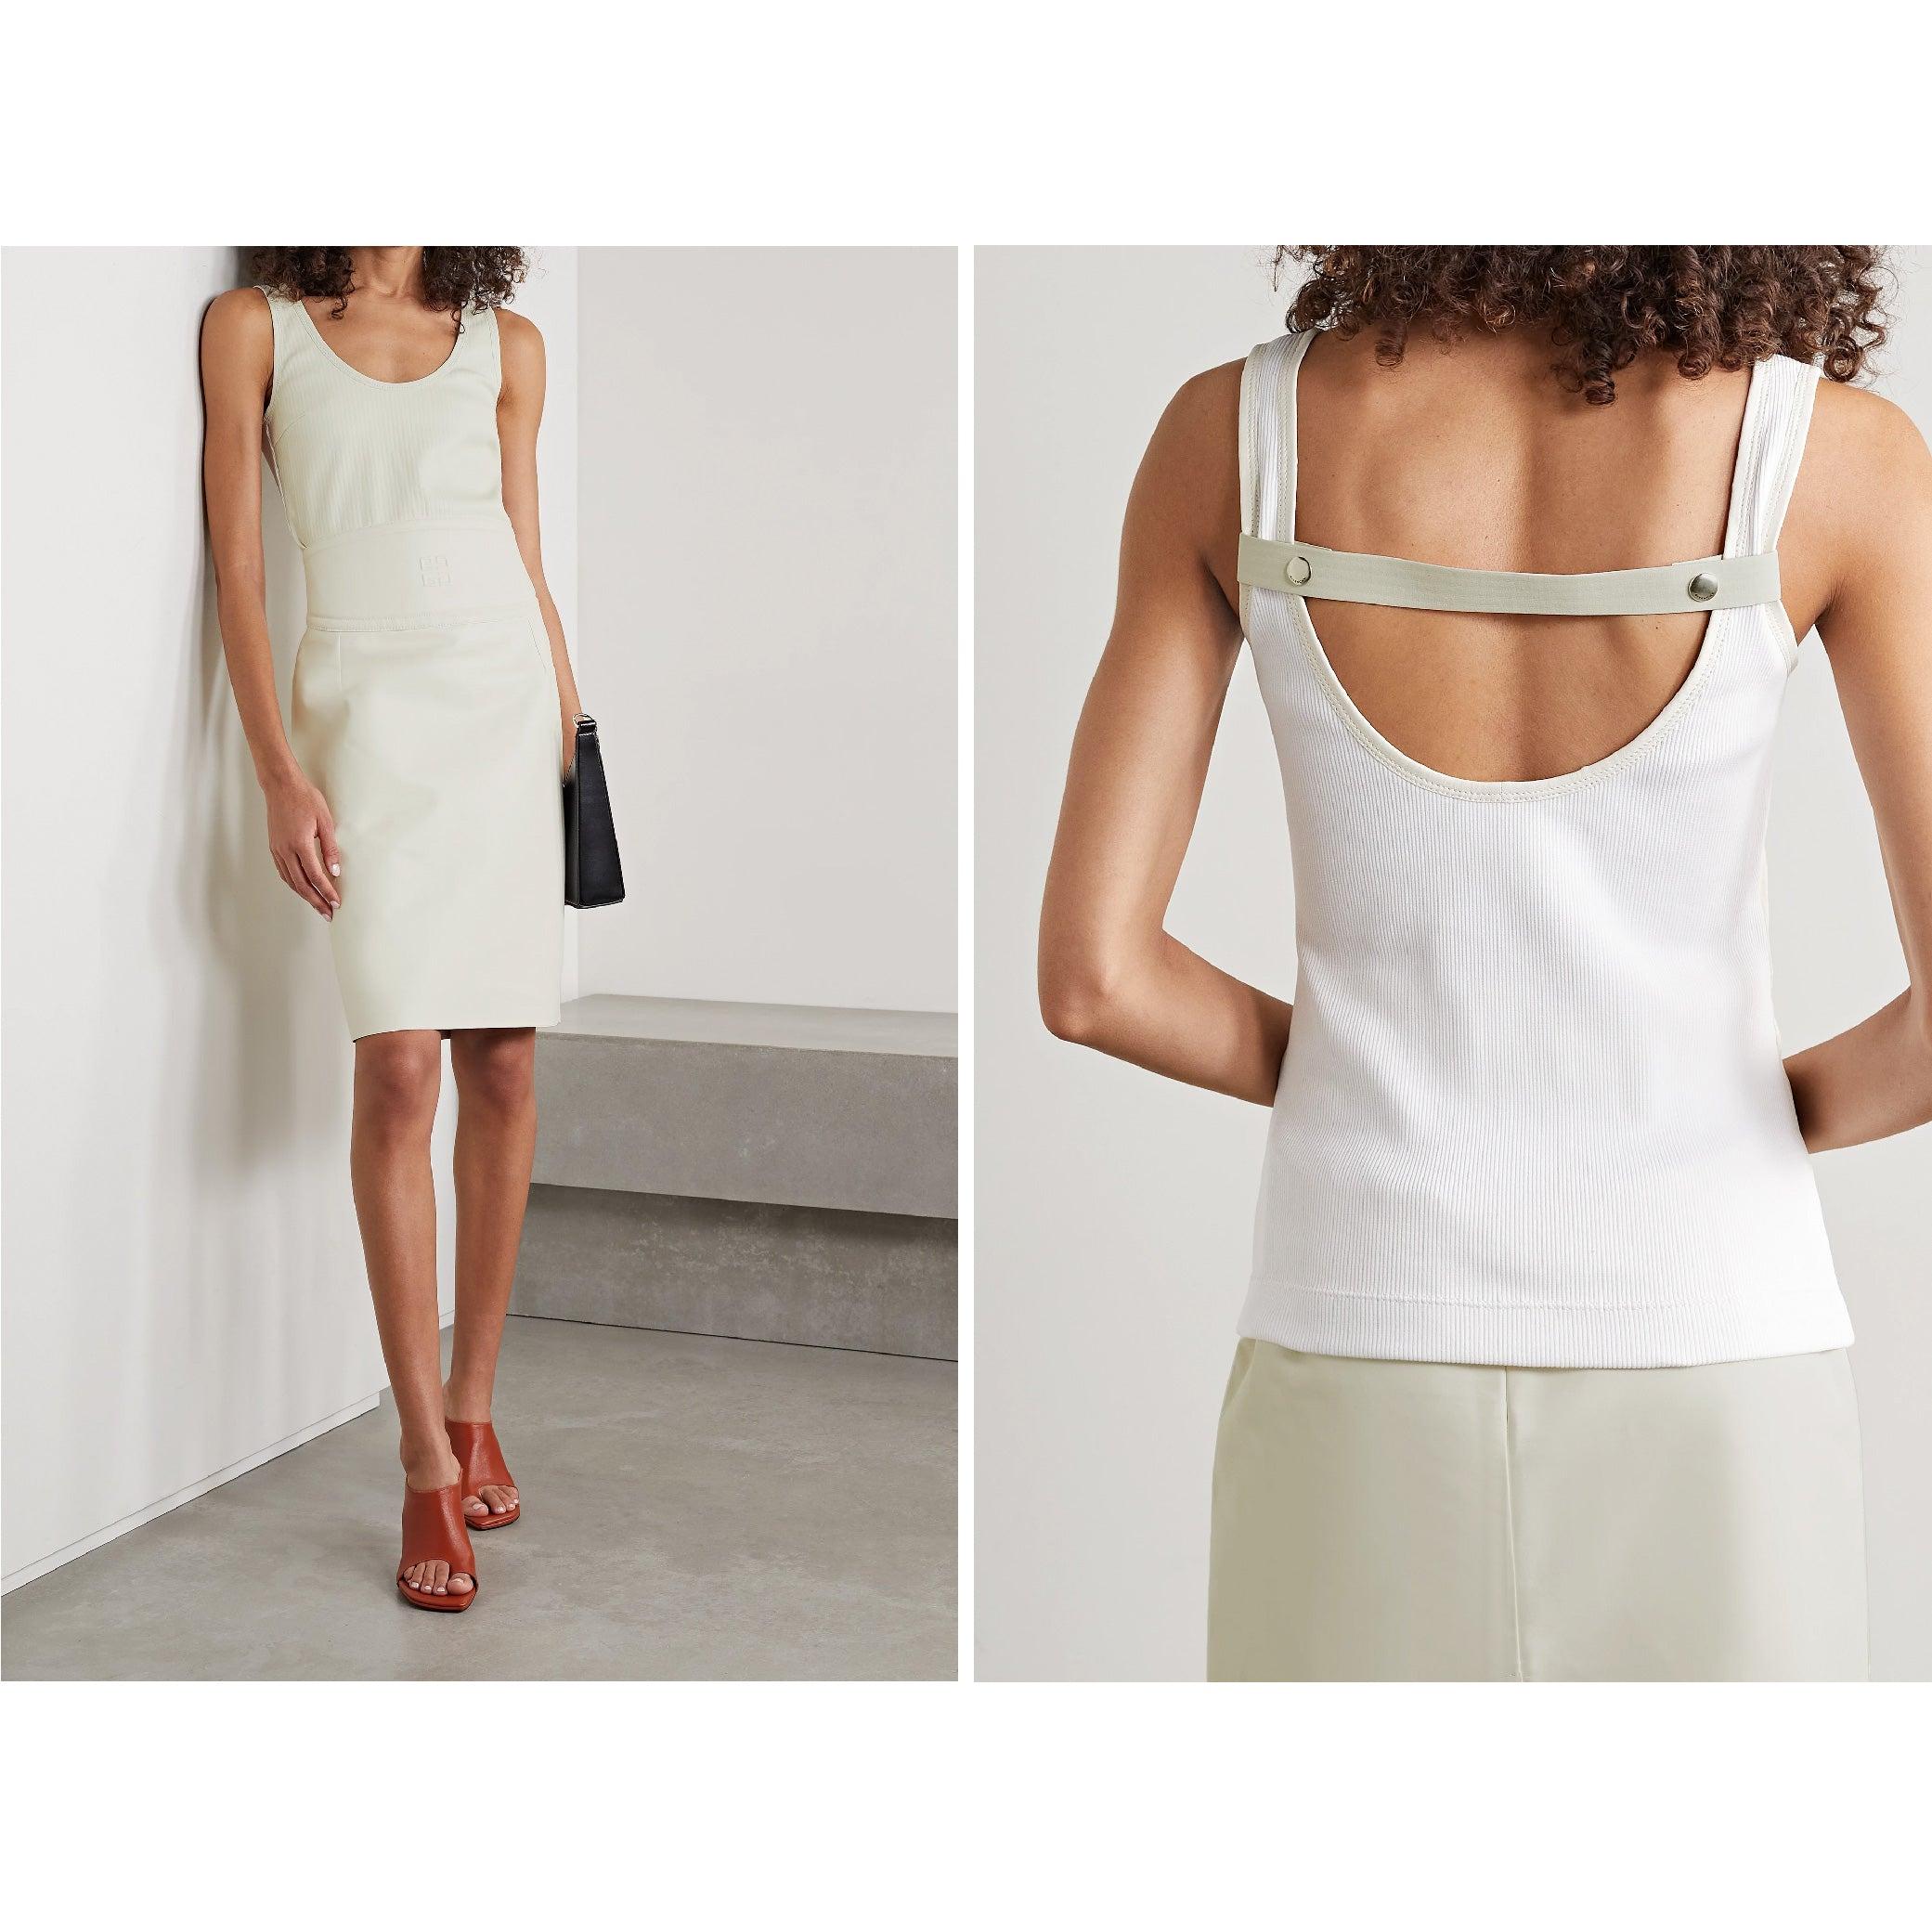 GIVENCHY open back sleeveless top comes in a cream lamb skin leather with a panel ribbed design featuring wide shoulder straps and a scooped stretch cotton jersey back. Made in Italy.Very Good
Pre-Owned Condition. 

Marked:   XSDesigner Style Code: